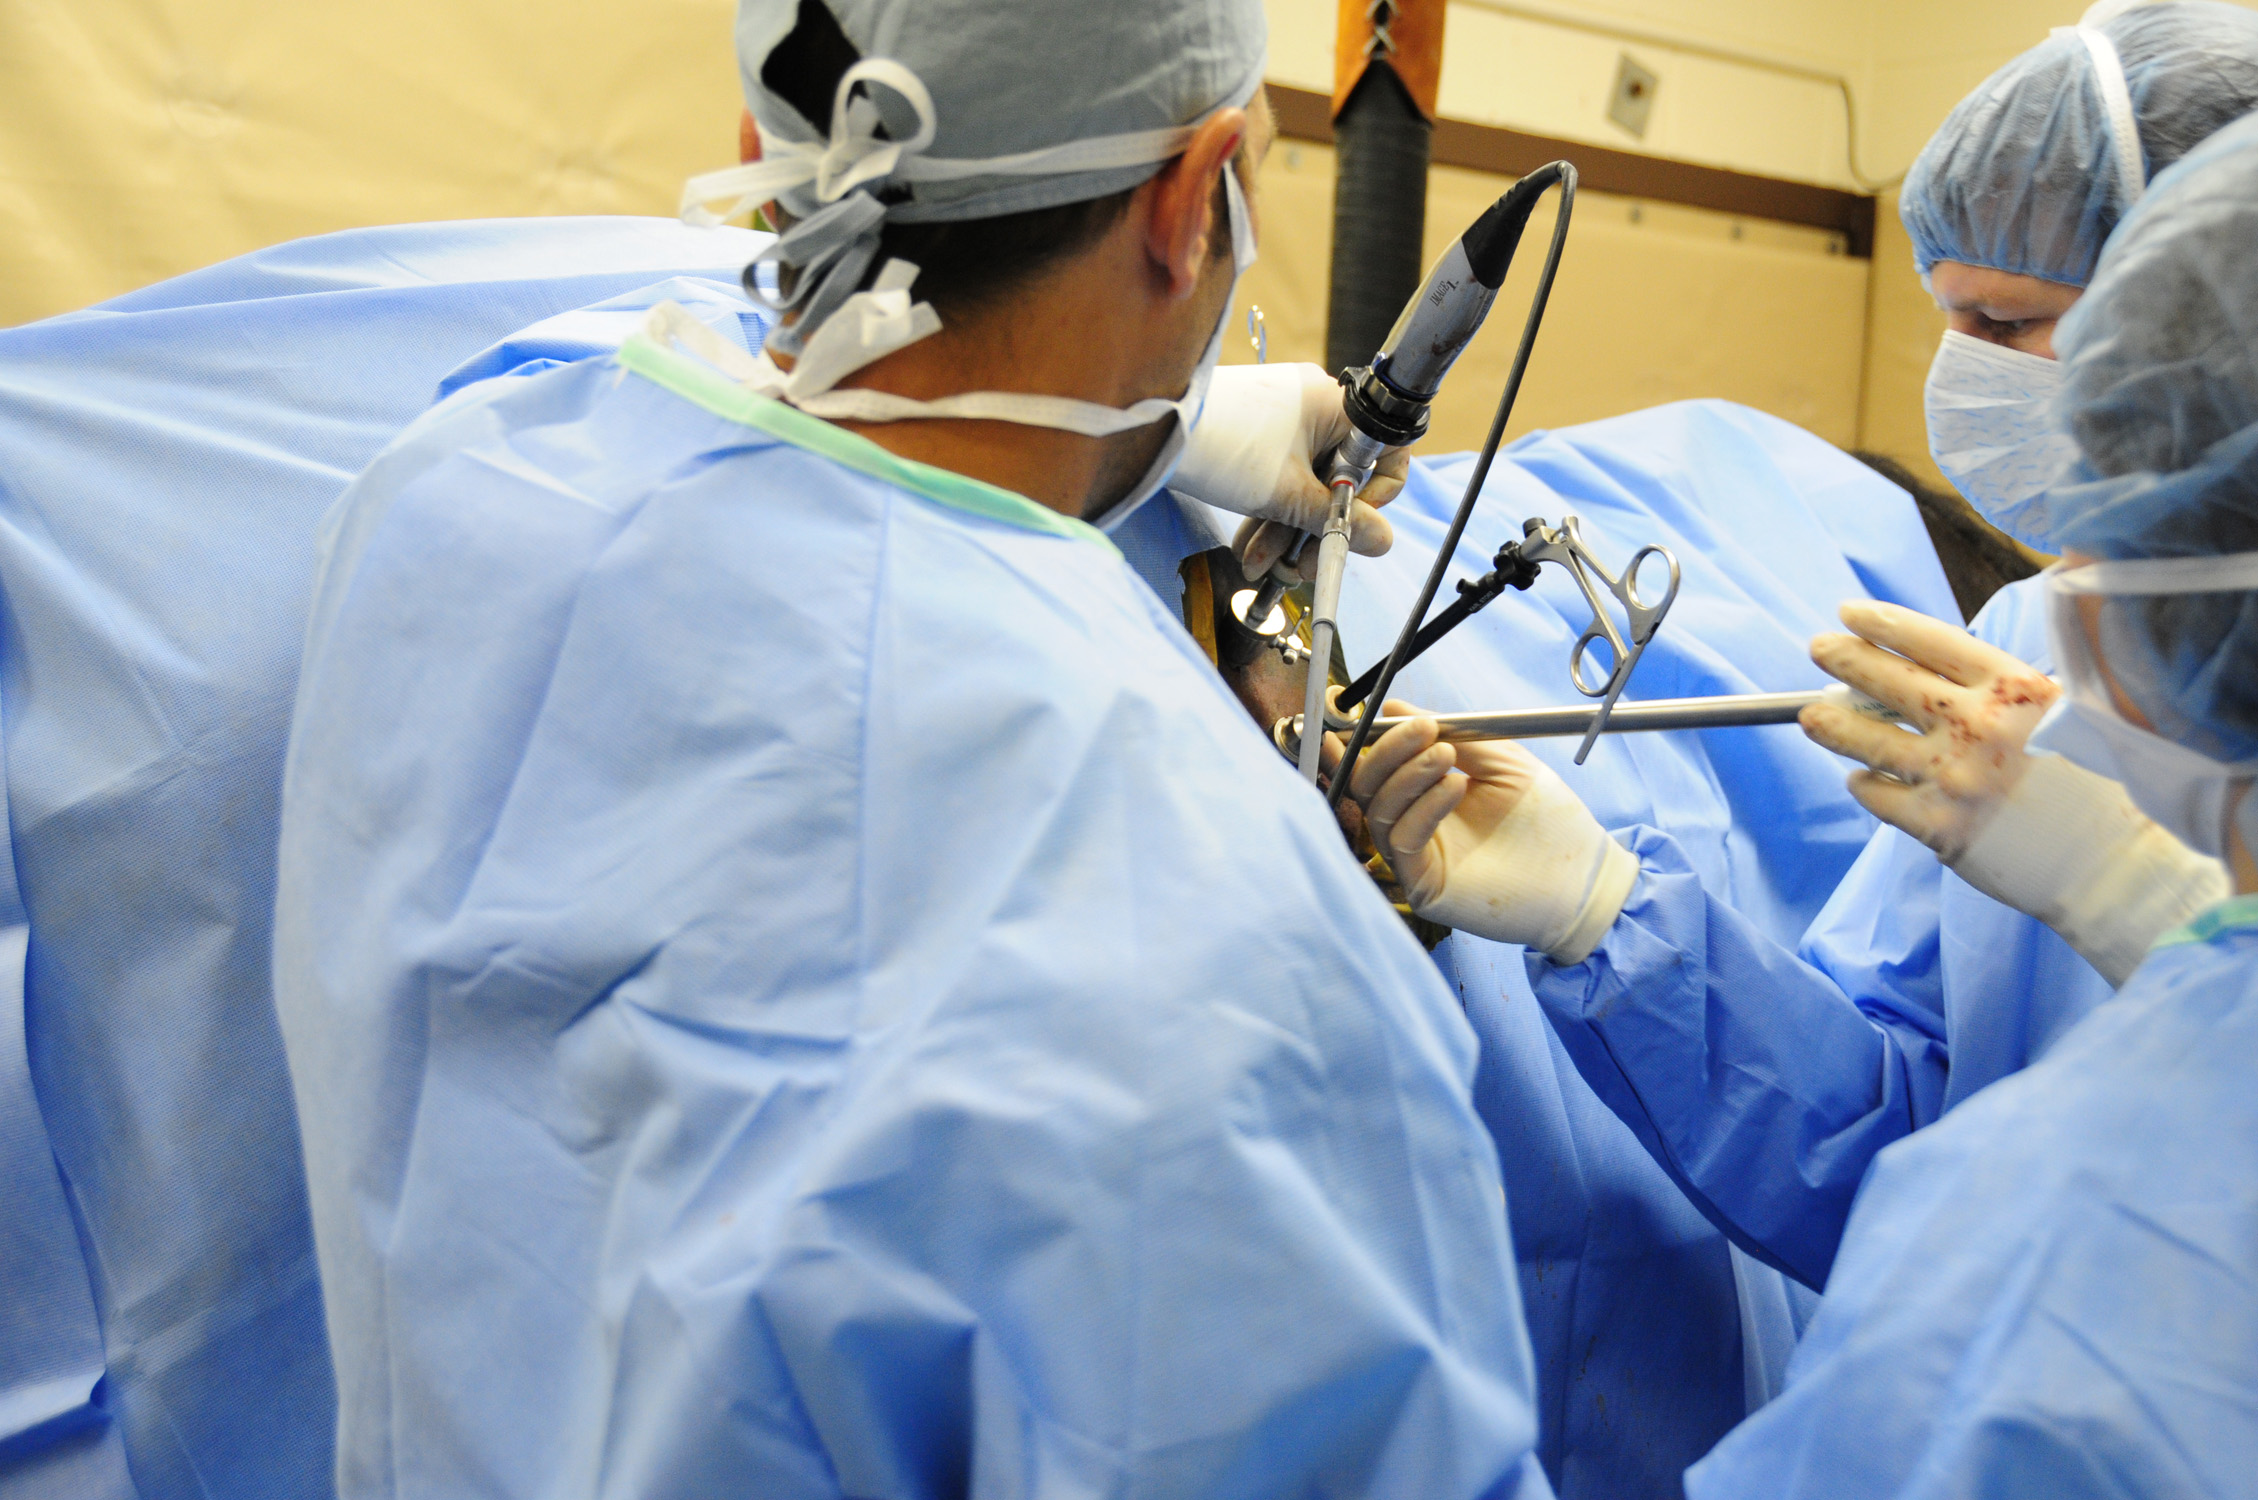 Dr. Norrie Adams, left, performs a laparoscopic ovariectomy with the assistance of Dr. James Brown.